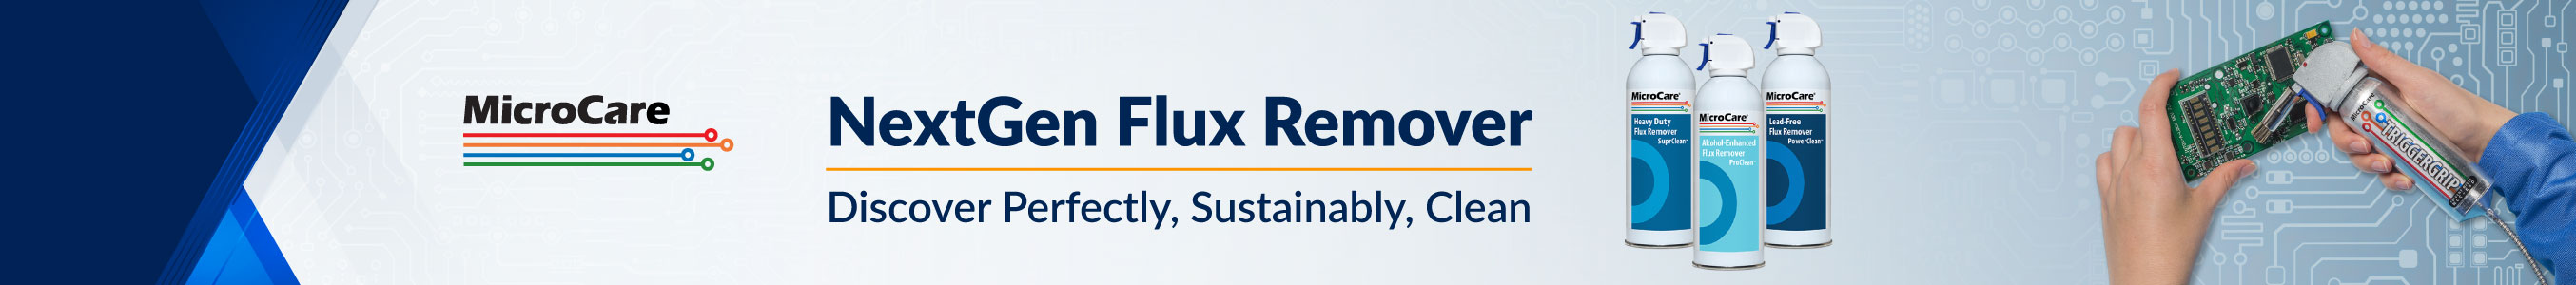 microcare flux removers in banner